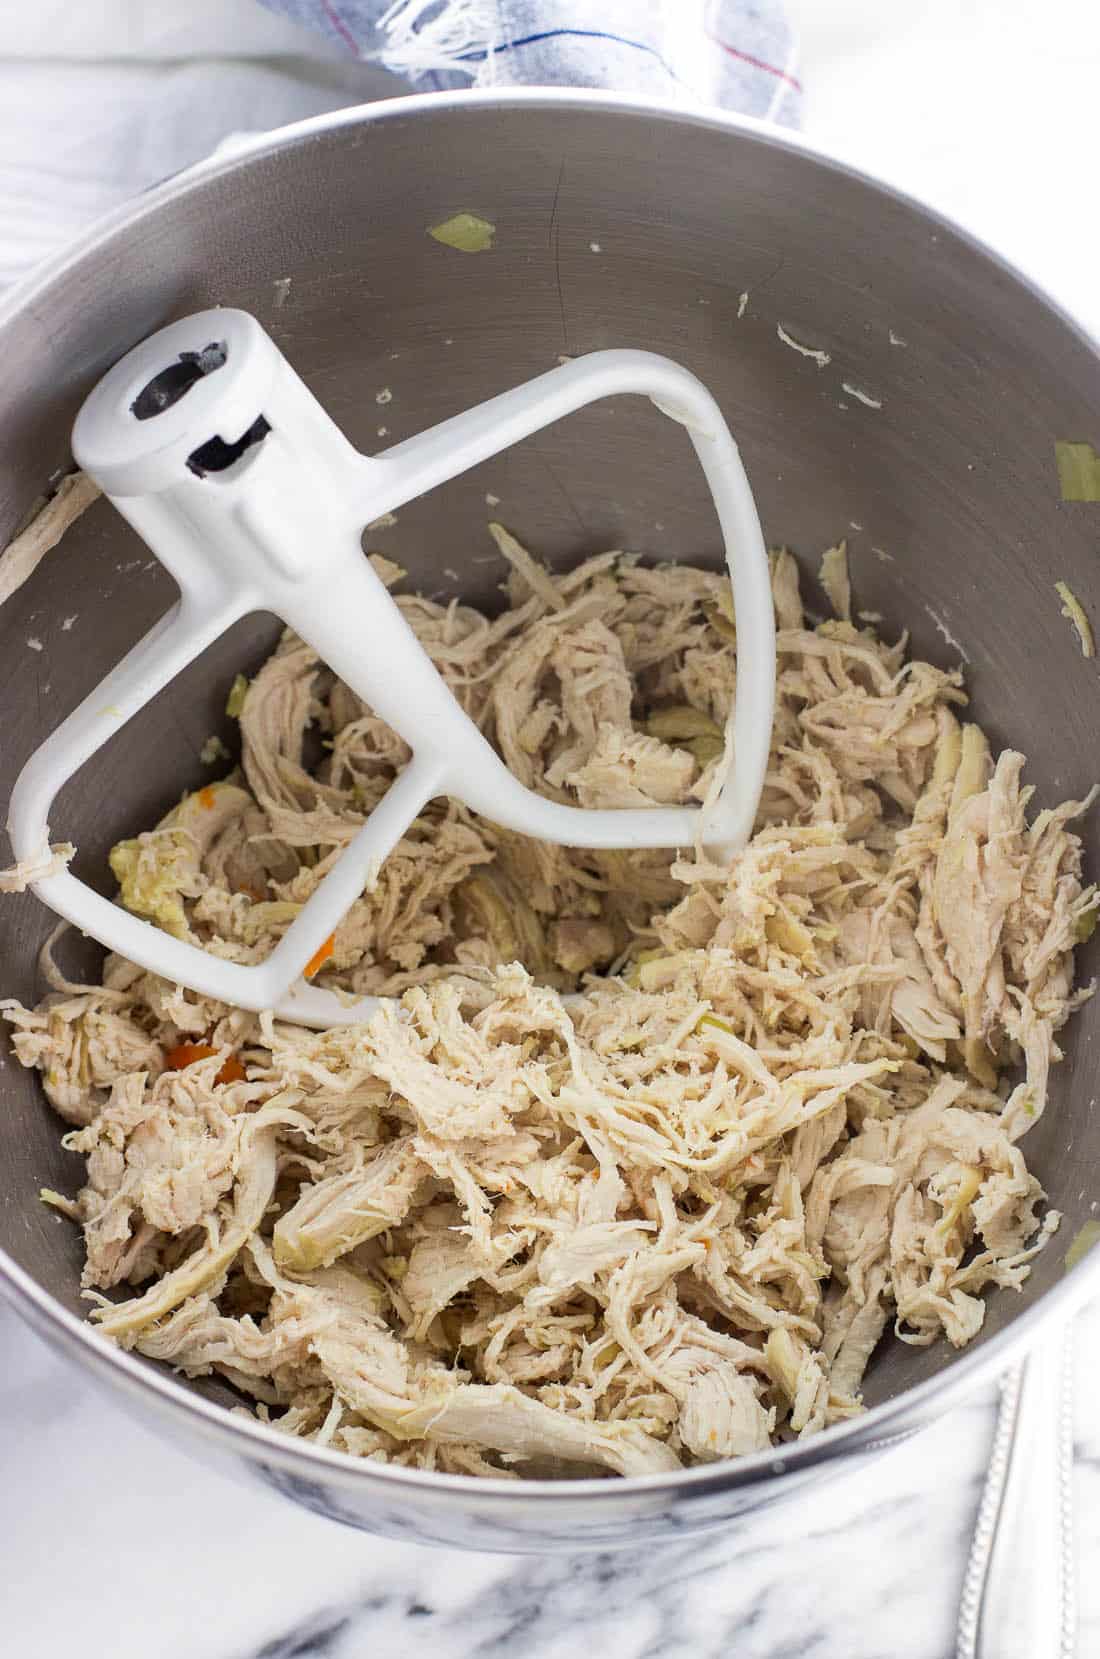 Cooked shredded chicken in a stand mixer bowl.